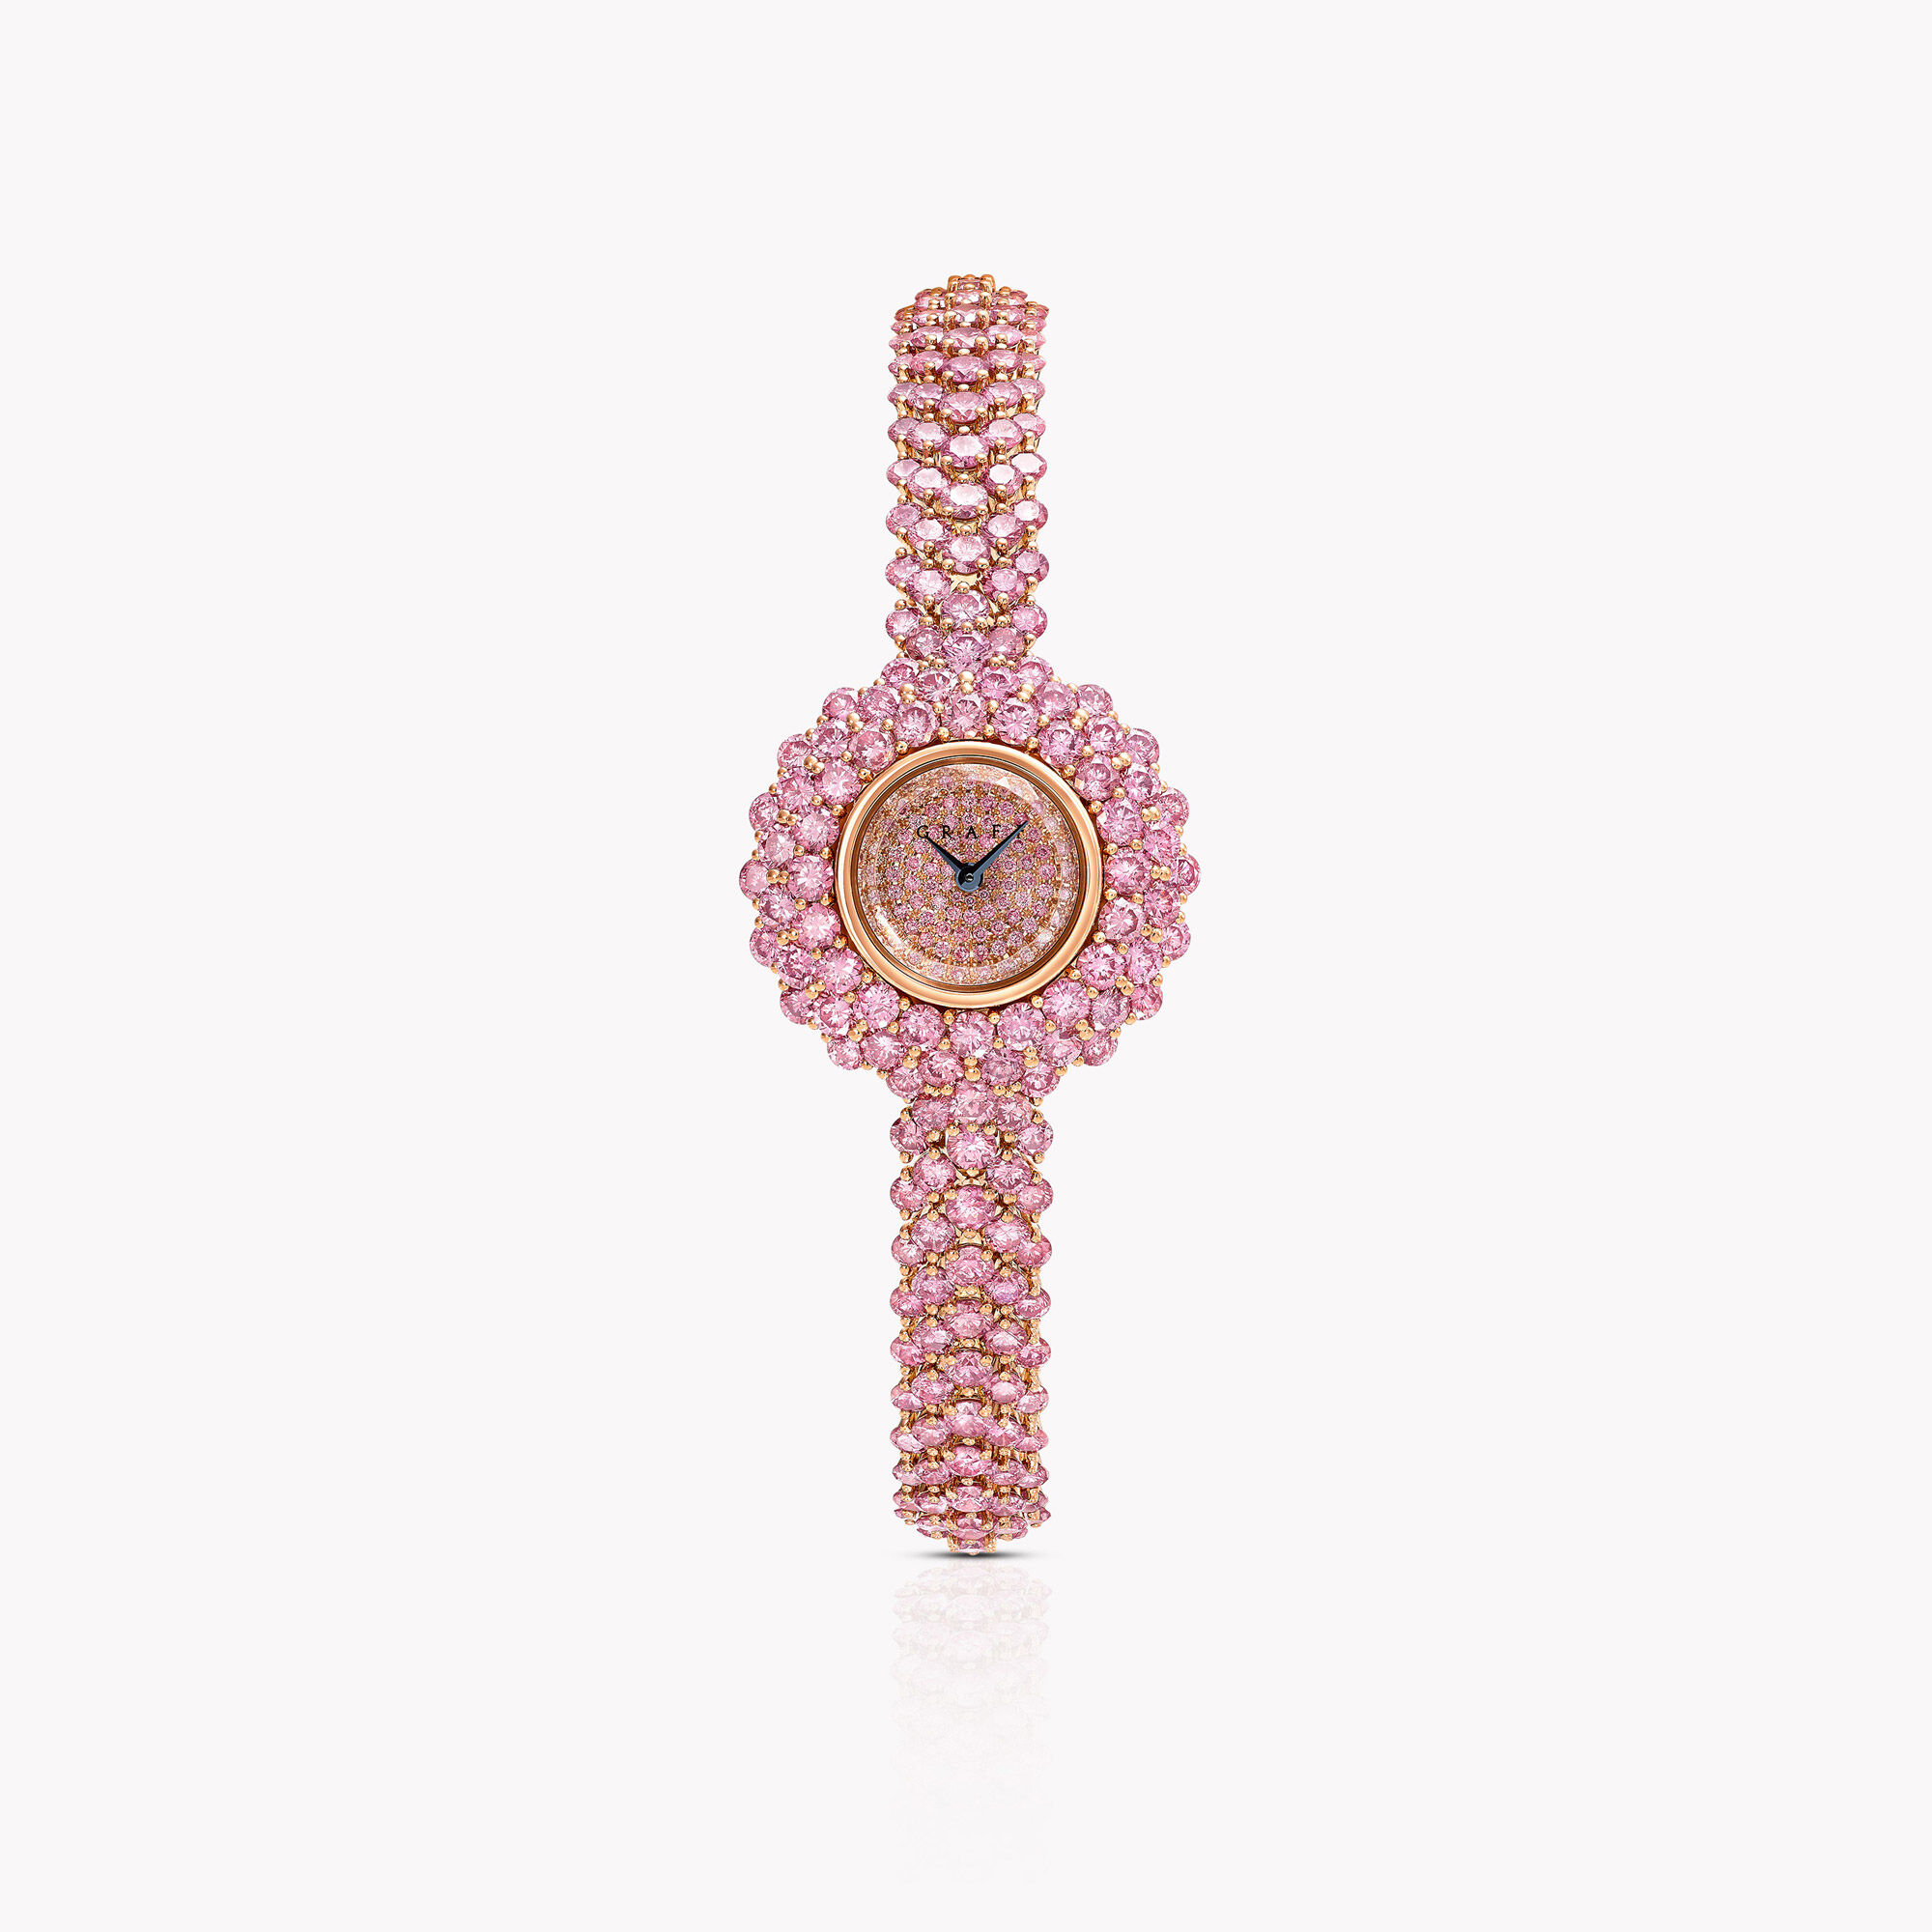 Oval Diamond Watch (24.49 cts) from the Graff unique timepieces collection